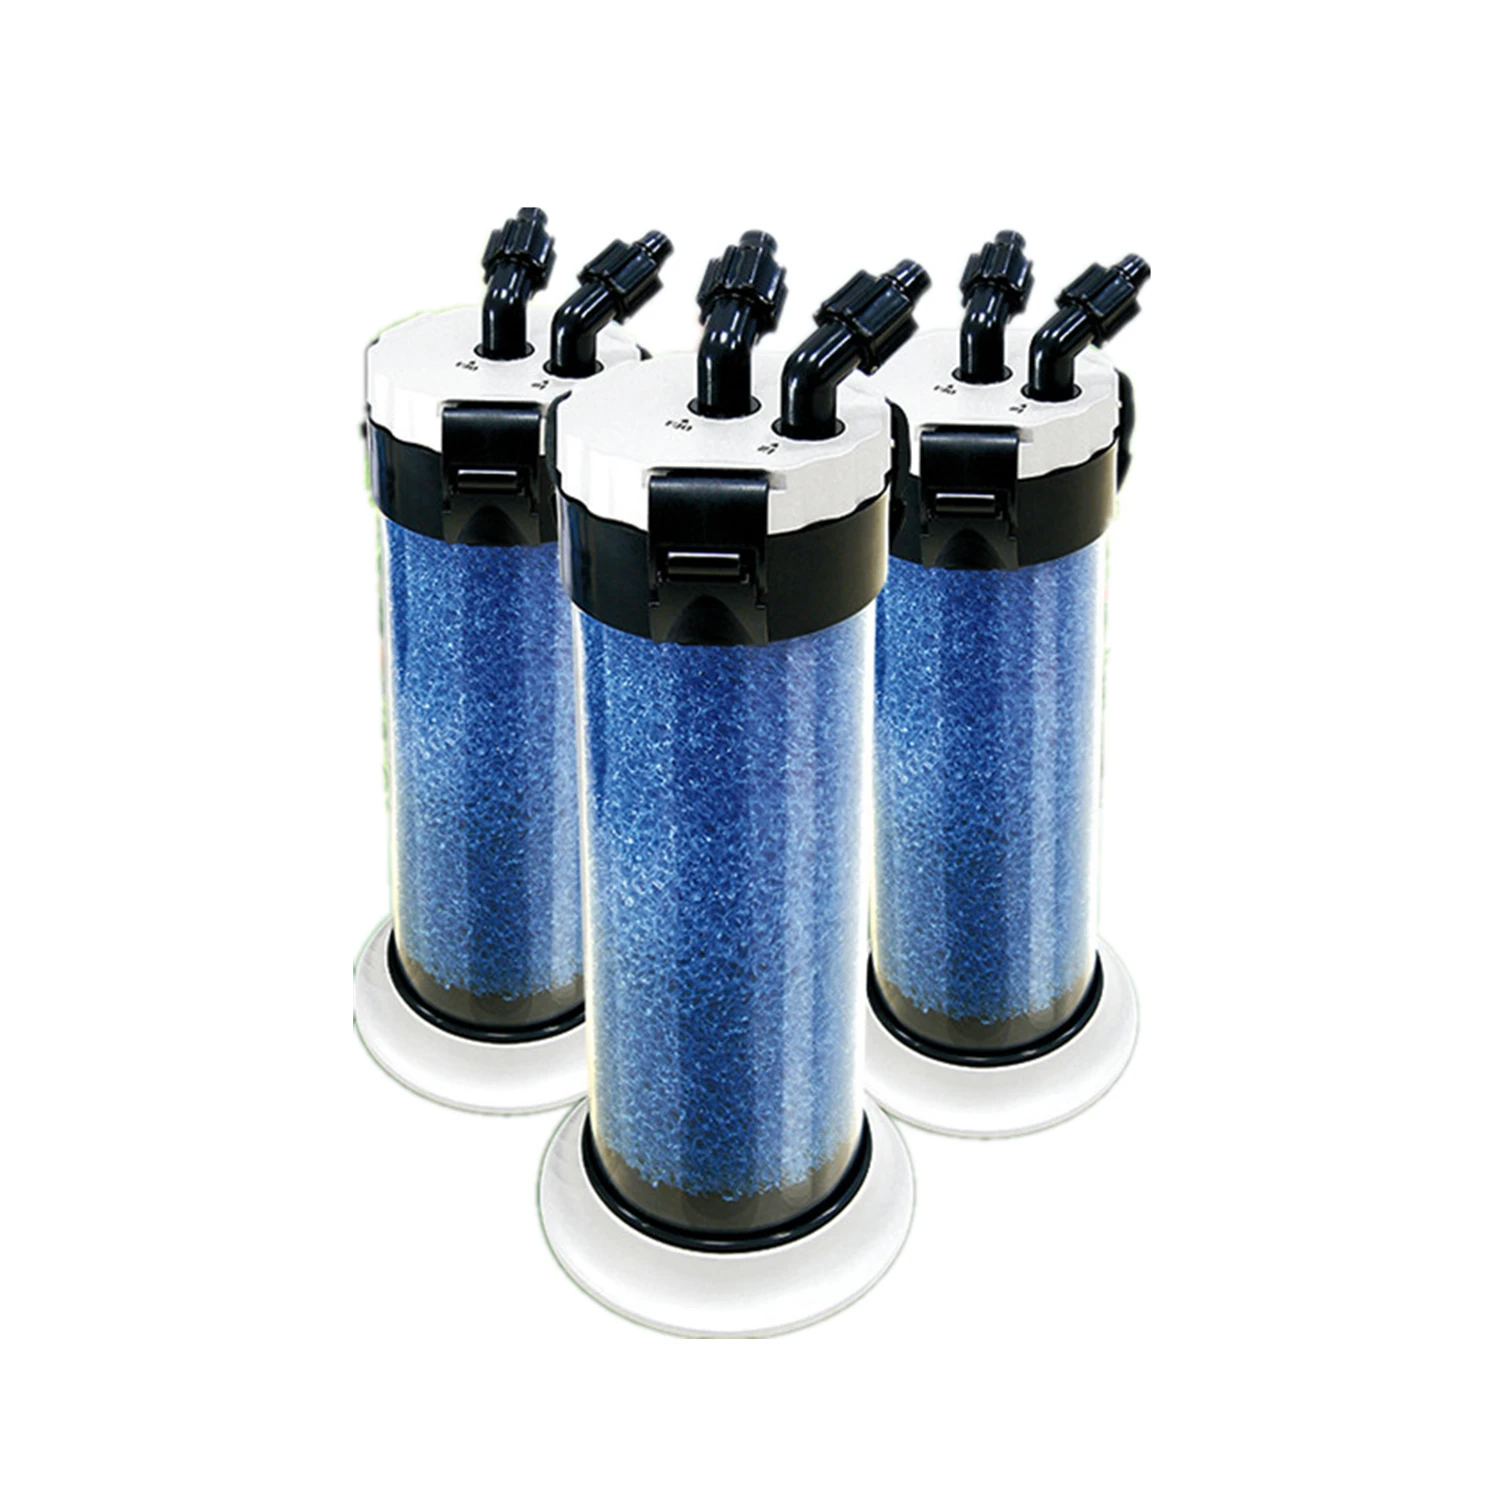 

External Aquarium Sponge Filter Canister Fish Tank Prefilter Used With External Filter Pump or Water Pump For Tube 12mm 16mm